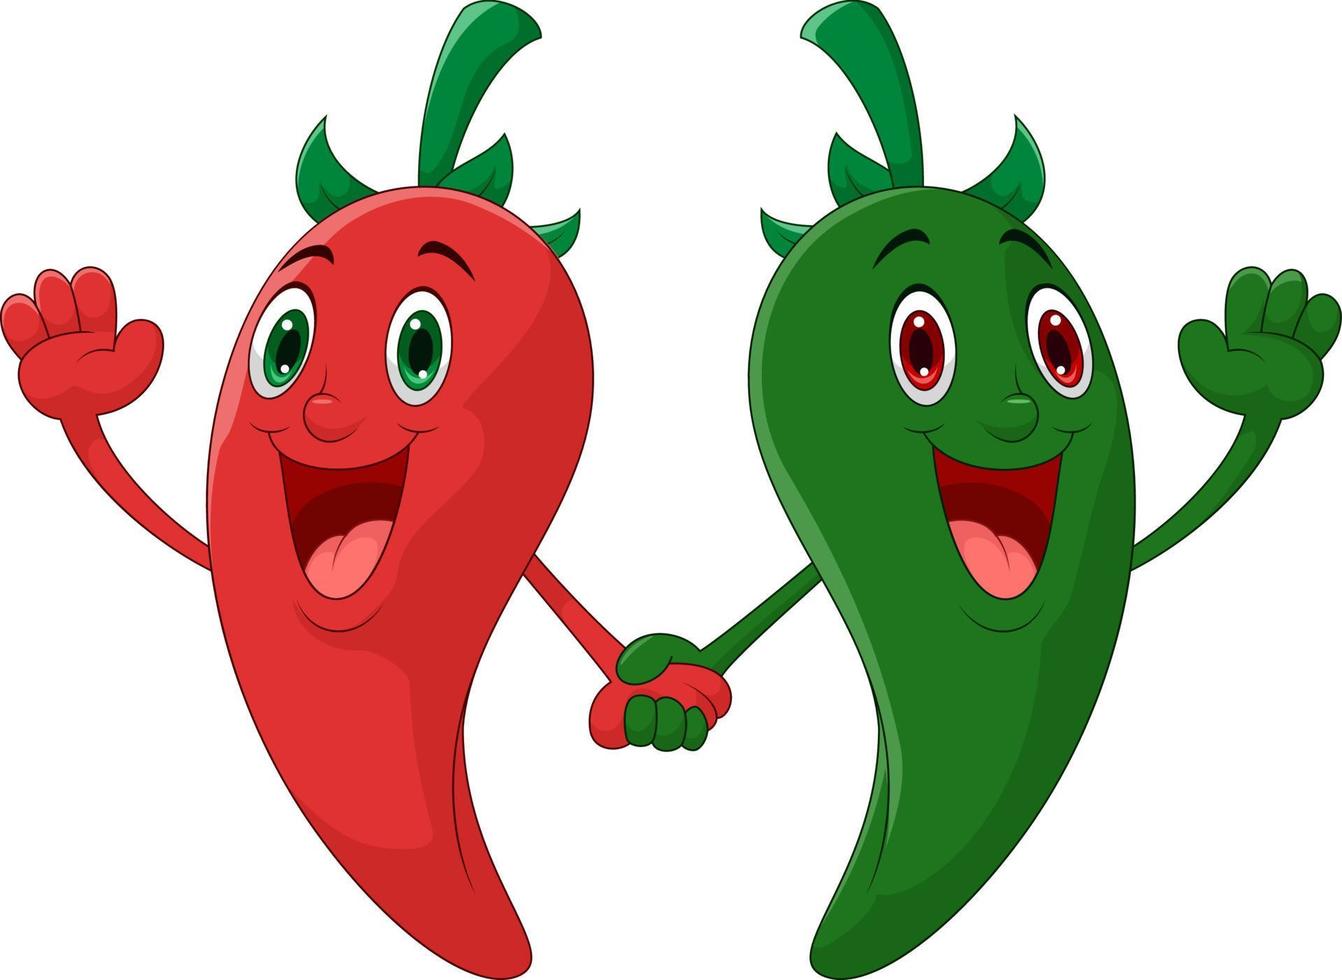 Red and green pepper holding hand vector